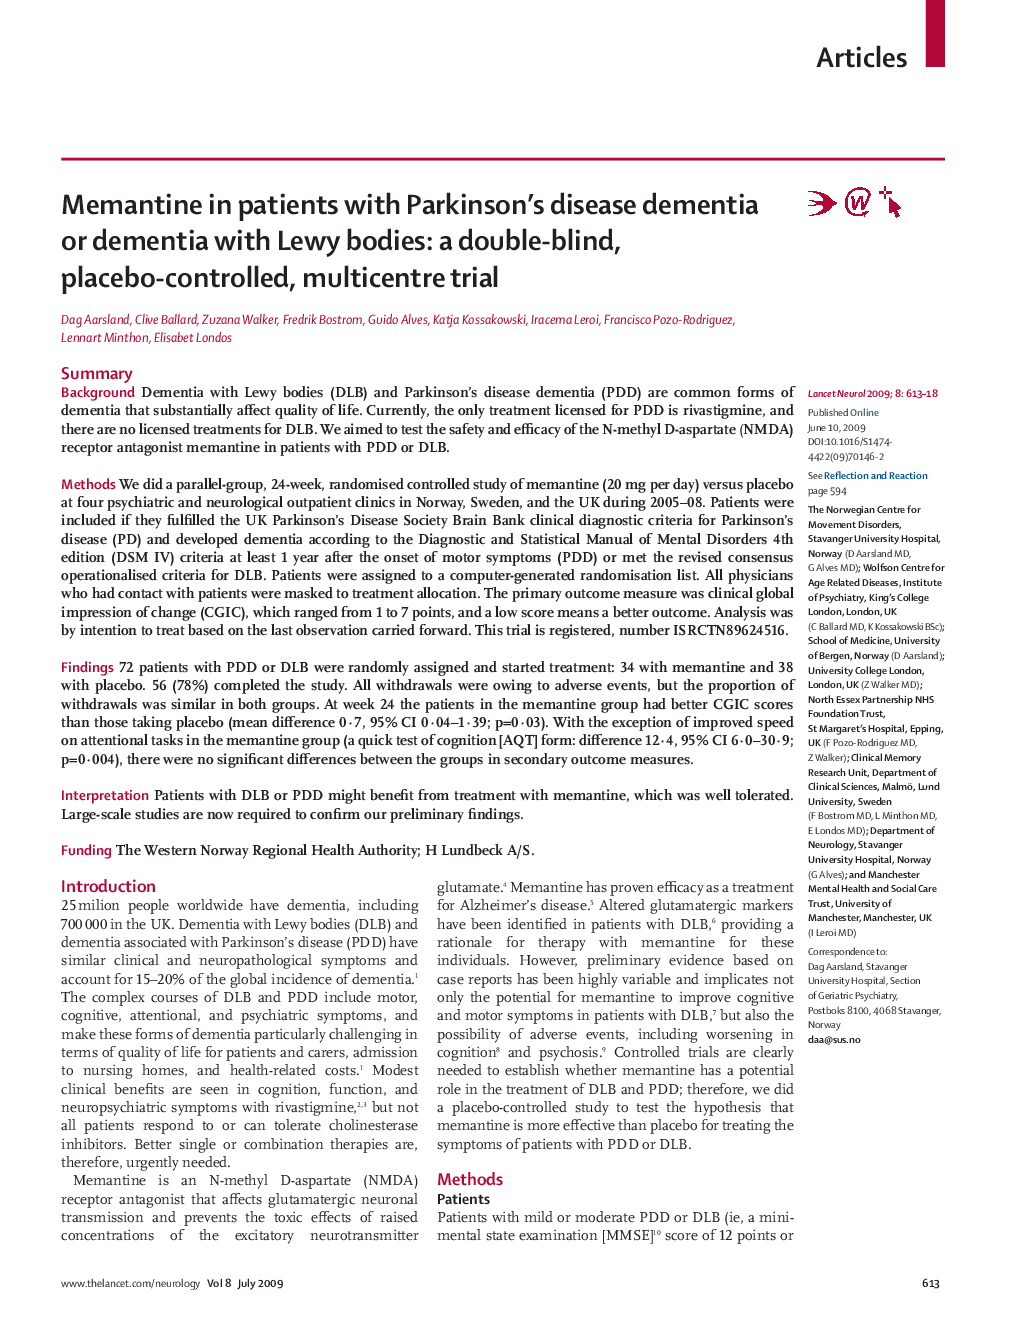 Memantine in patients with Parkinson's disease dementia or dementia with Lewy bodies: a double-blind, placebo-controlled, multicentre trial